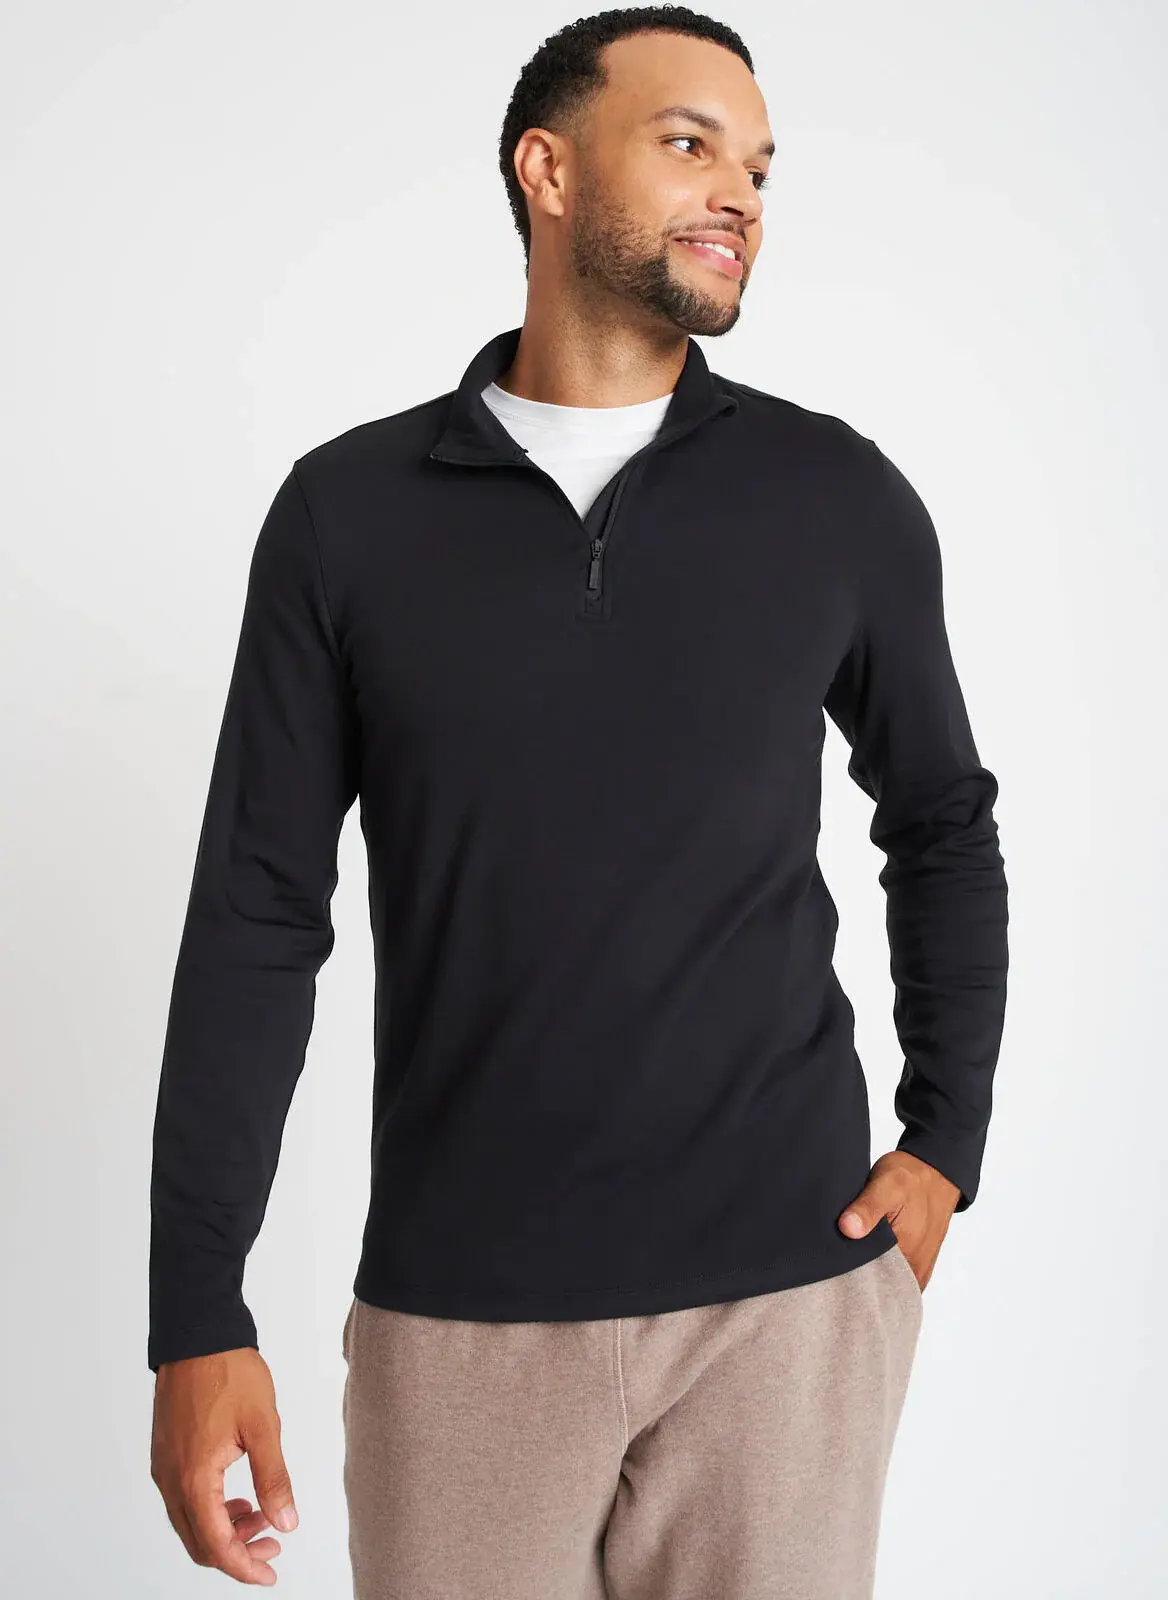 Kit And Ace Comfy Quarter Zip Pullover. 1